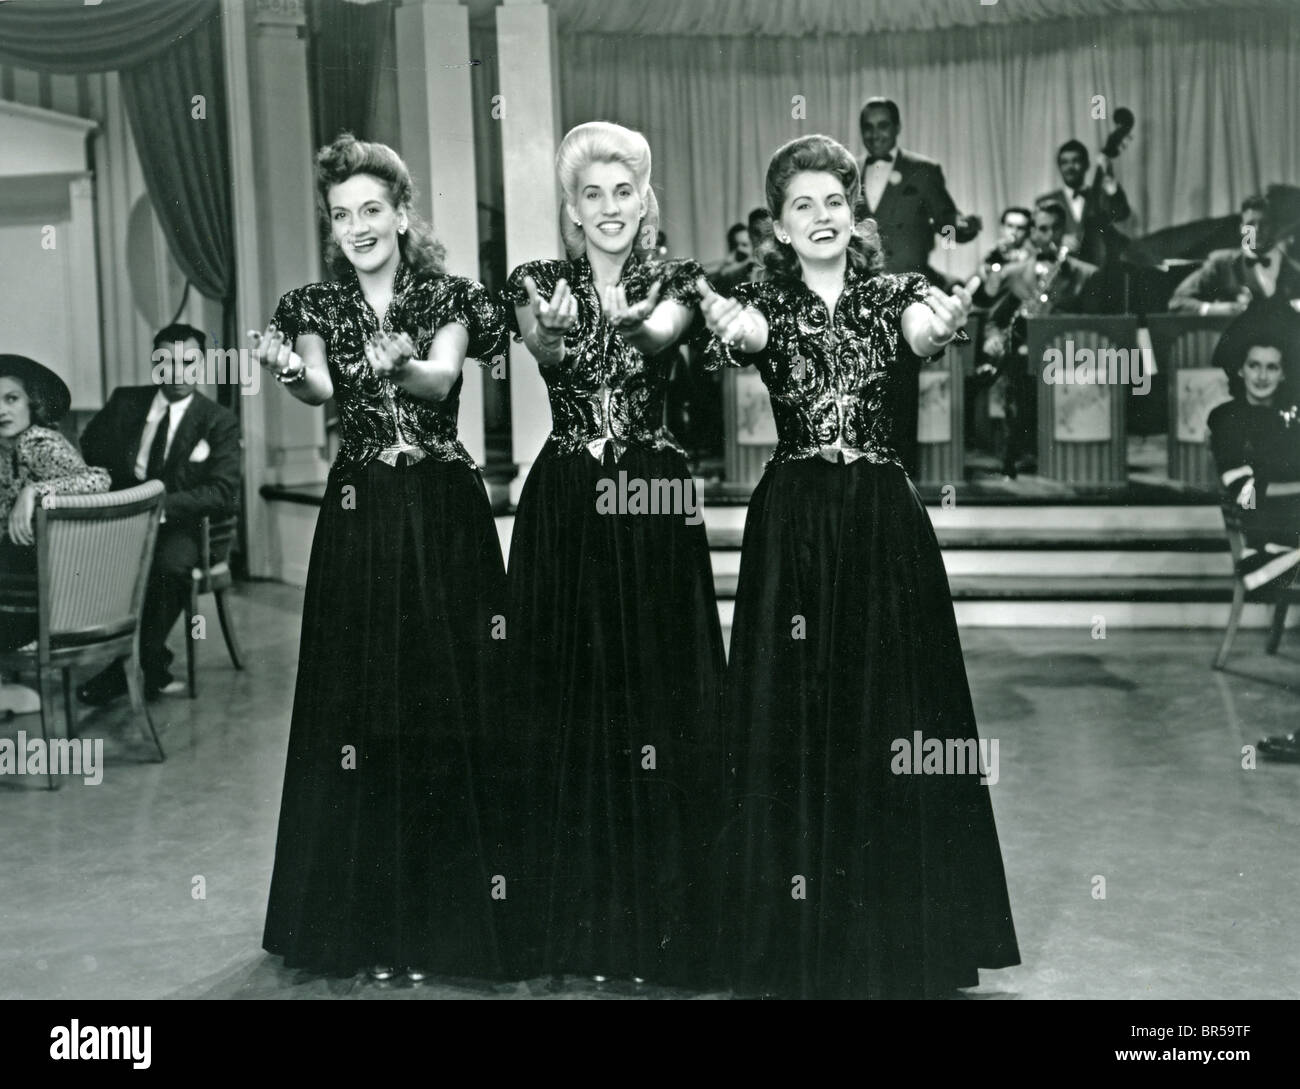 ANDREWS SISTERS - US vocal group from l: LaVerne, Patty and Maxene Stock Photo